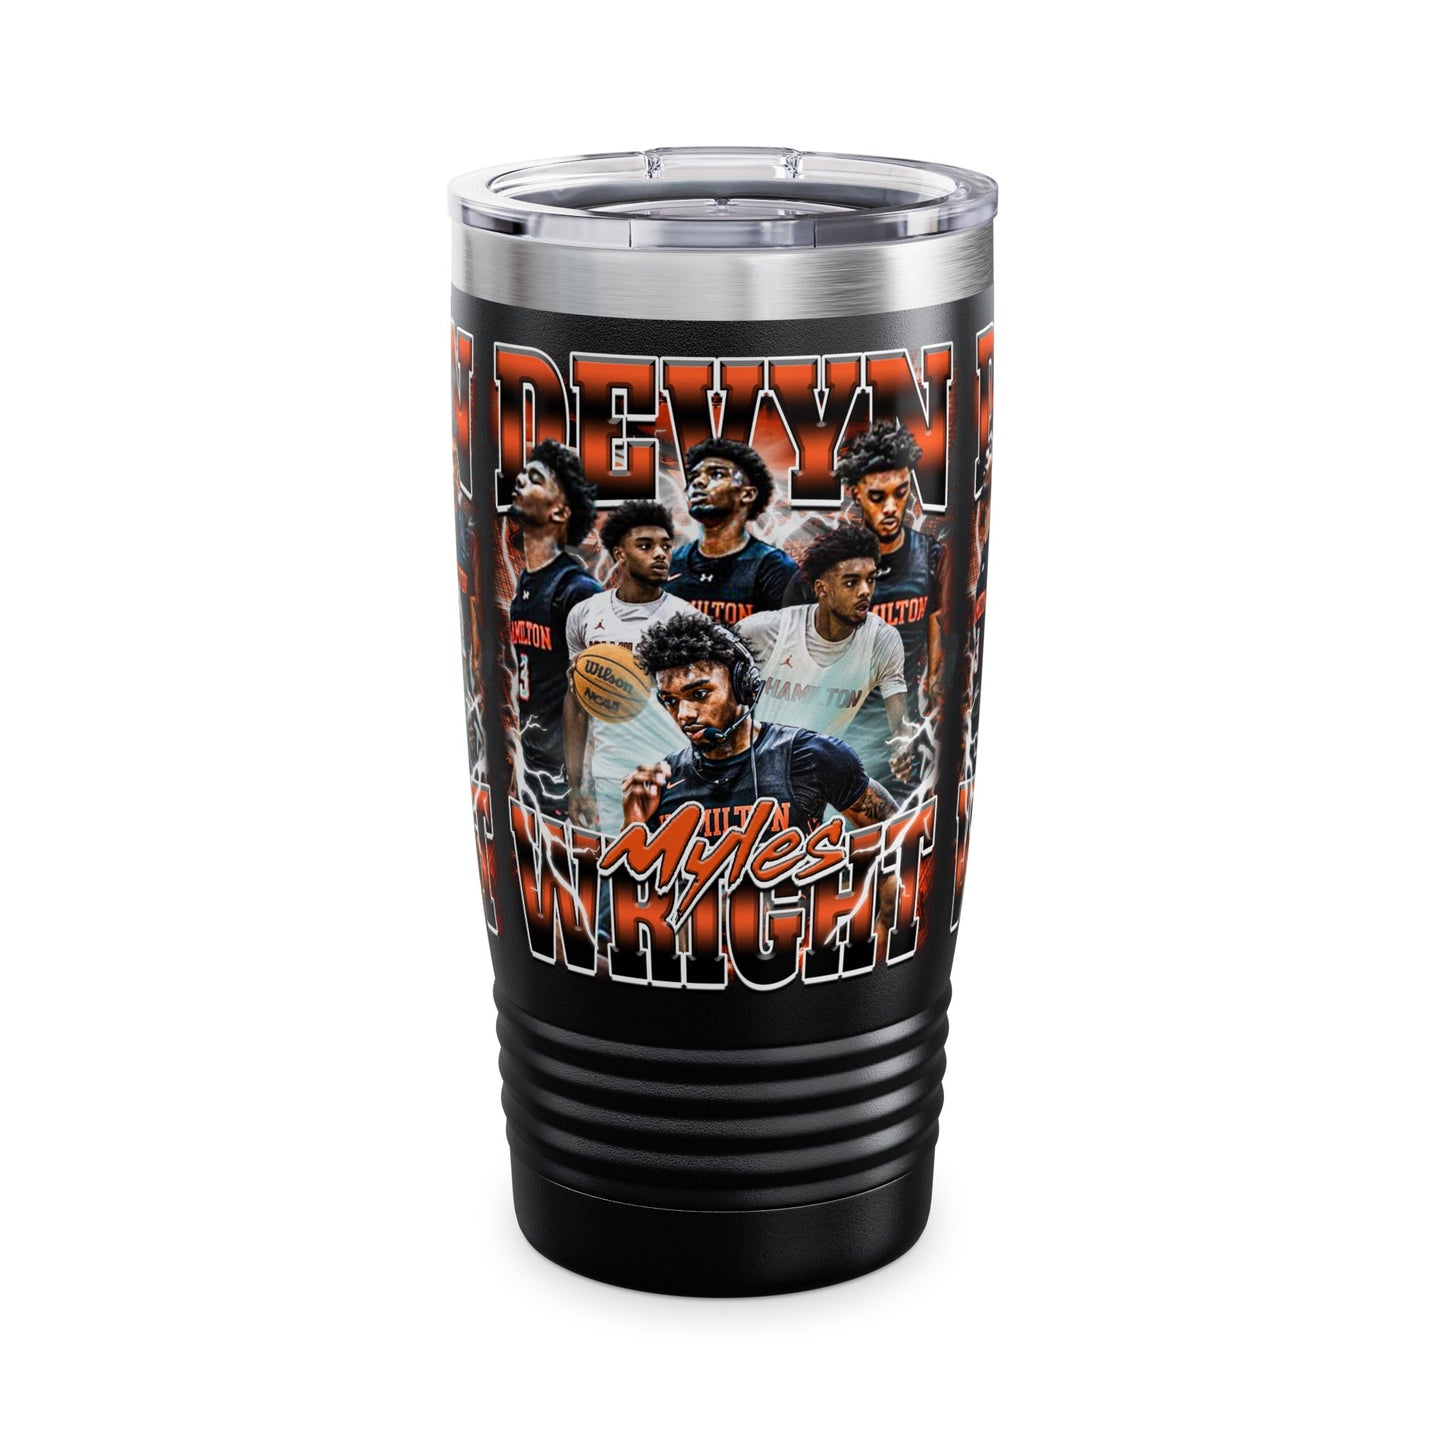 Devyn Wright Stainless Steal Tumbler